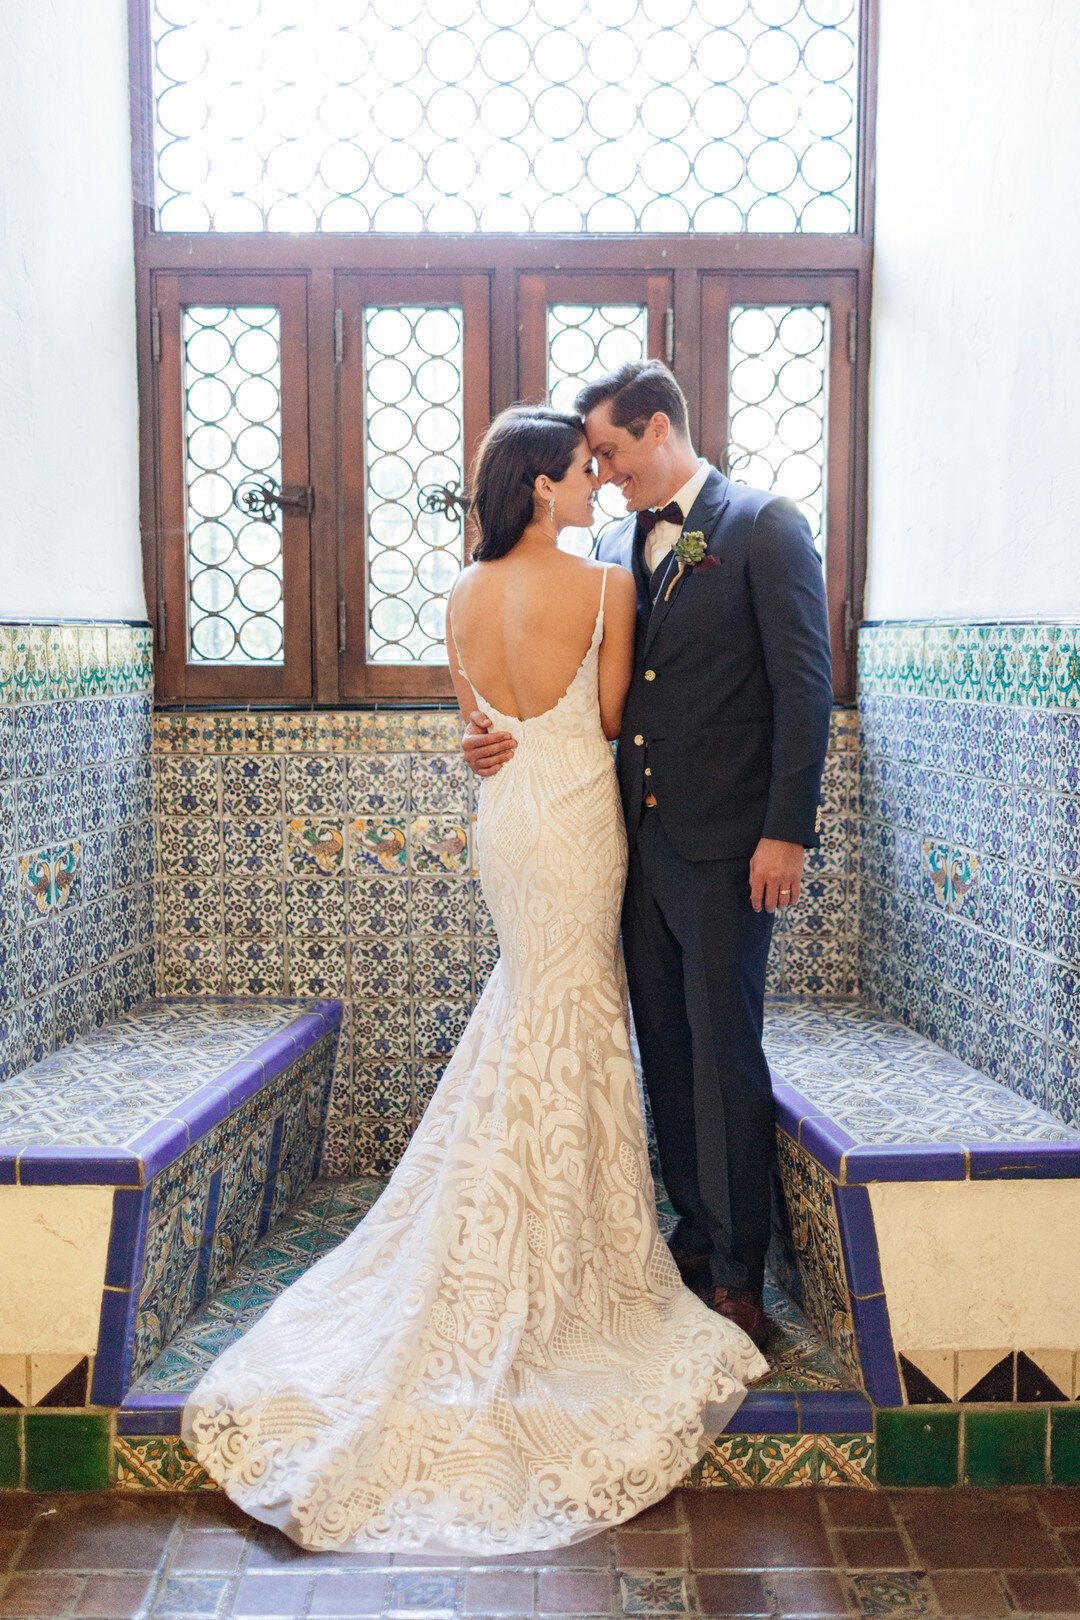 www.santabarbarawedding.com | Kaitie Brainerd | Santa Barbara Courthouse | Blush by Hayley Paige | Indochino | Bride and Groom Share a Moment at the Courthouse